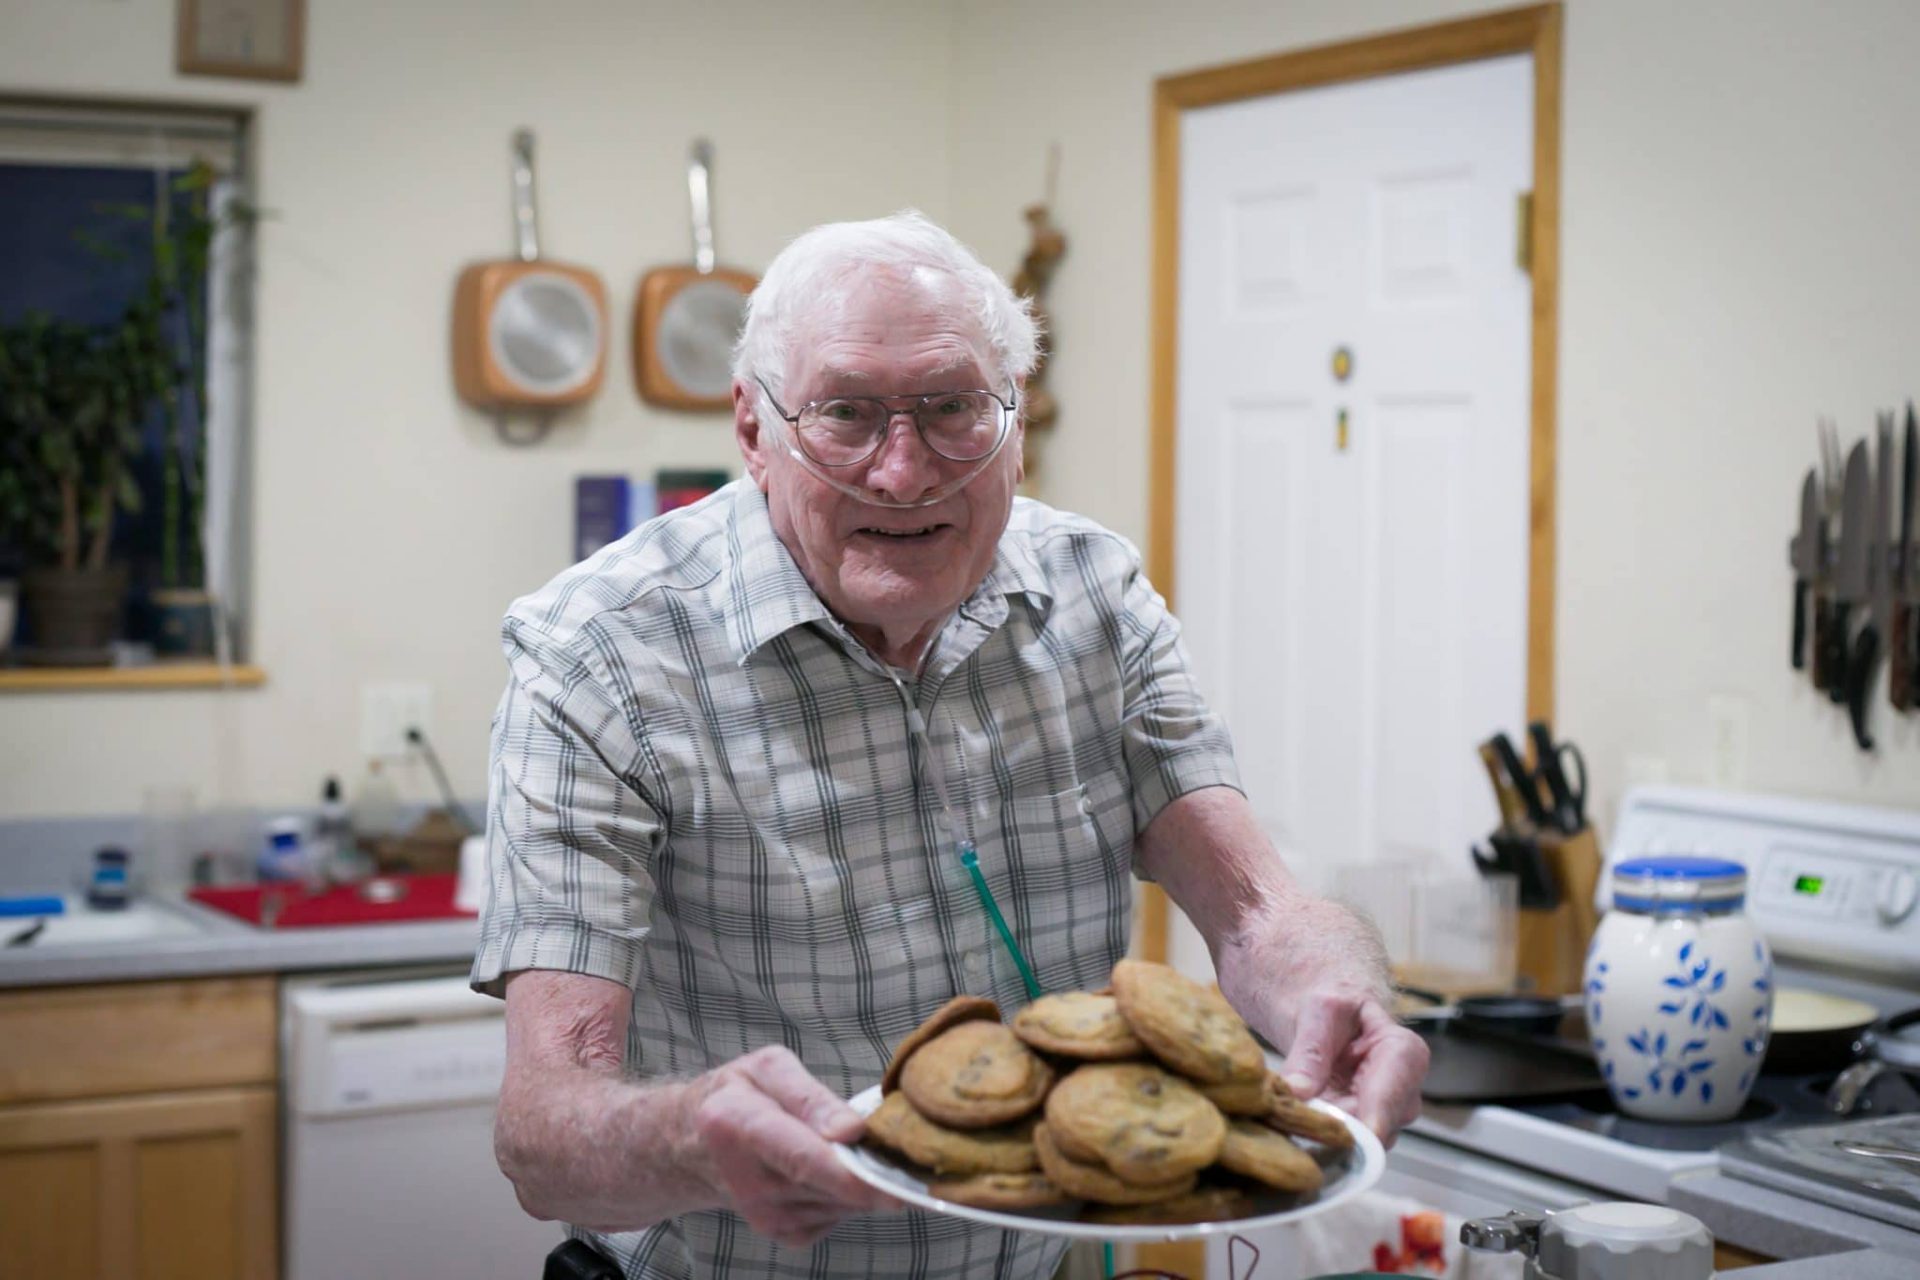 Ray’s chocolate chip cookies are legendary. Here he is shown serving a plate of cookies with a huge smile on his face.